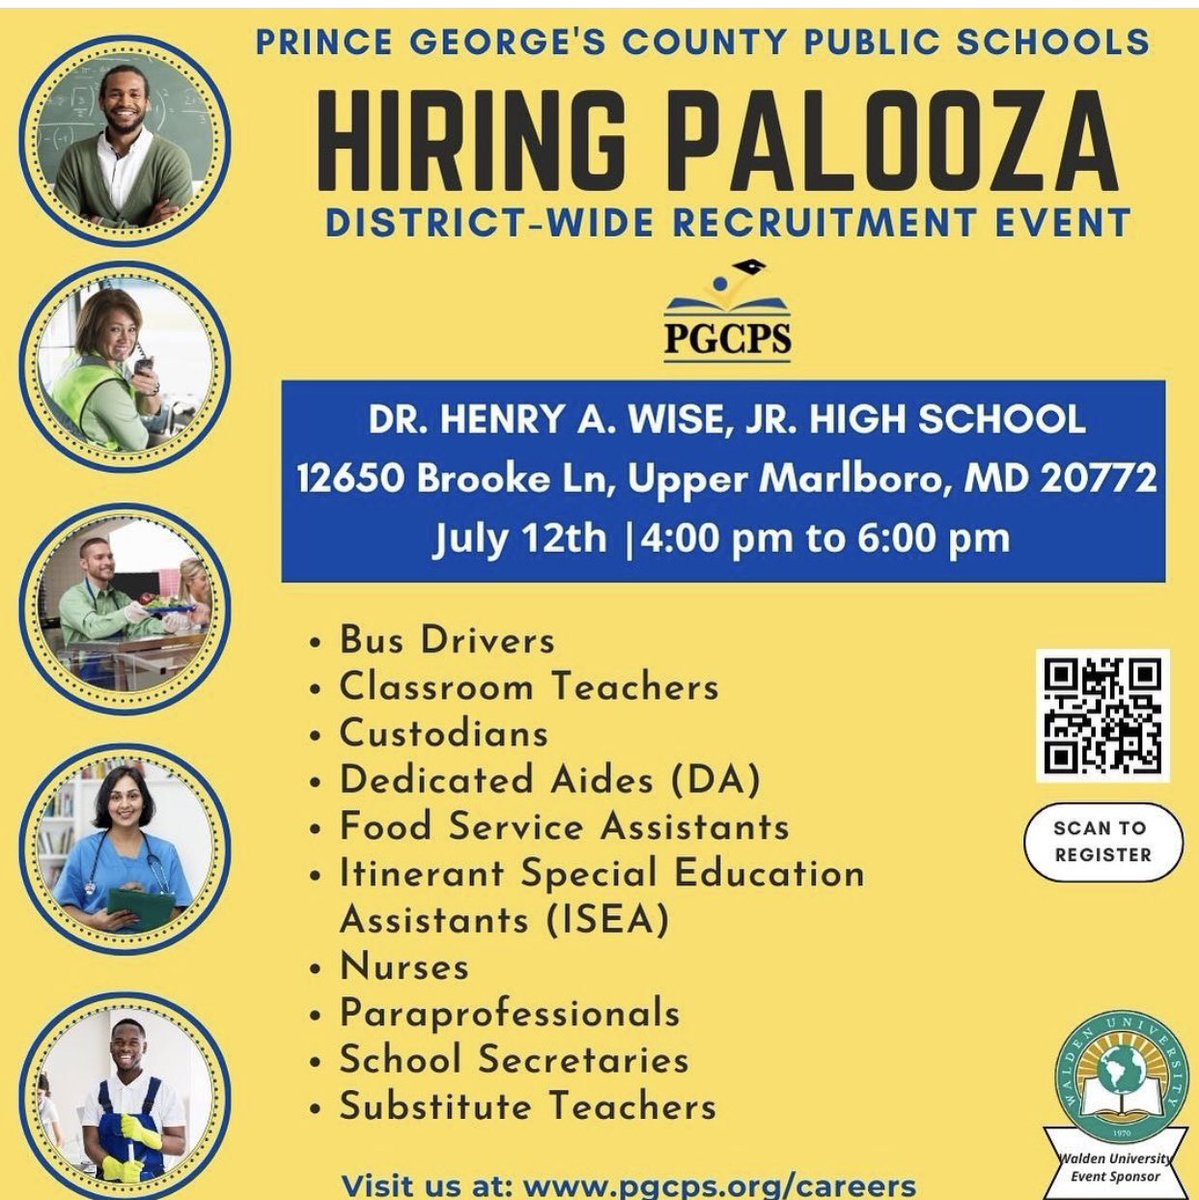 Get your resumes ready and bring your A game! Mark your calendars, and bring your resume, a friend and your A game. 😃
#pgcpsproud #teachwithus